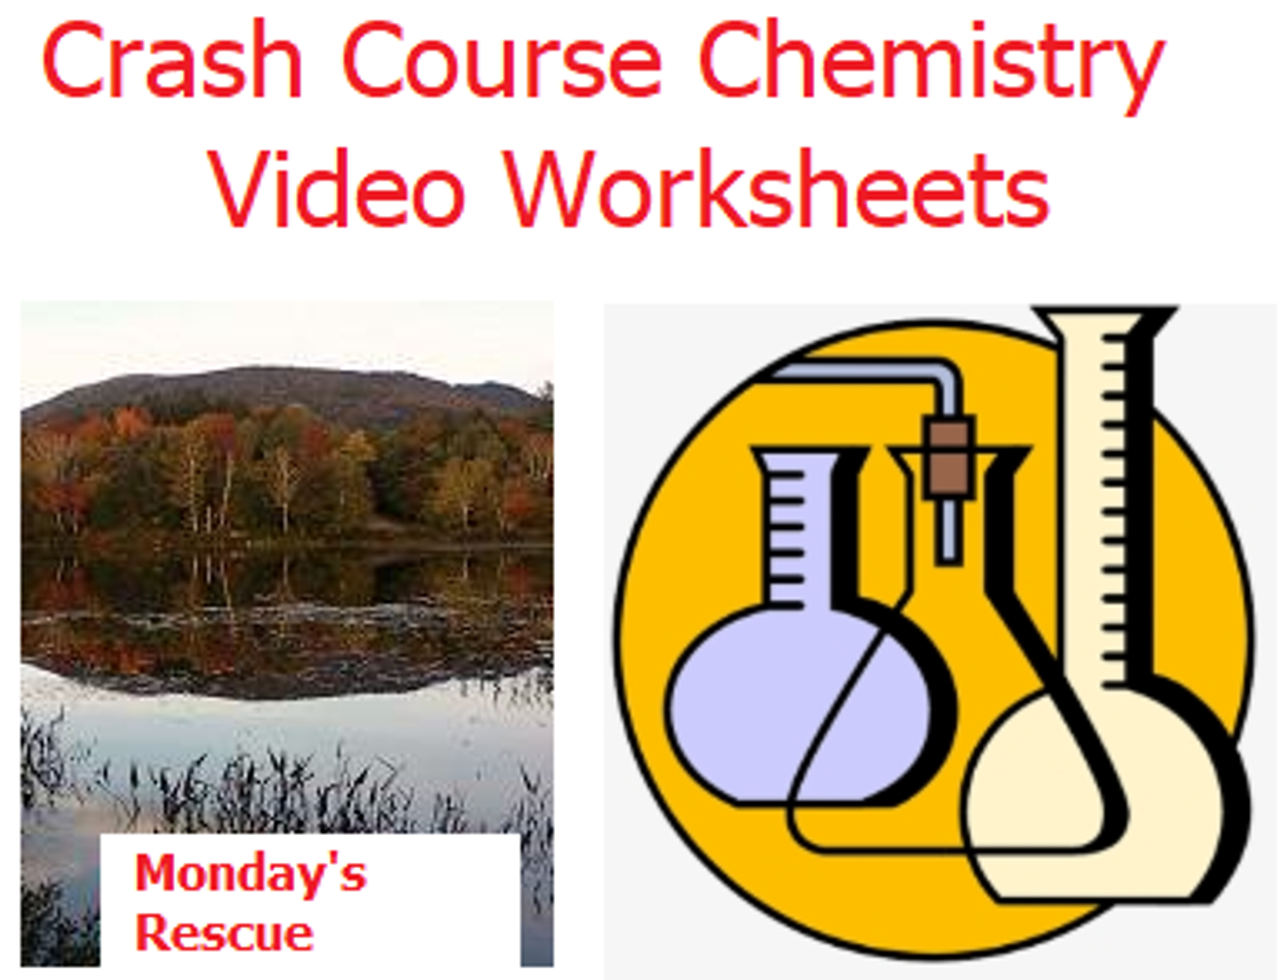 Crash Course Chemistry Video Worksheet 9: Precipitation Reactions (Distance Learning)